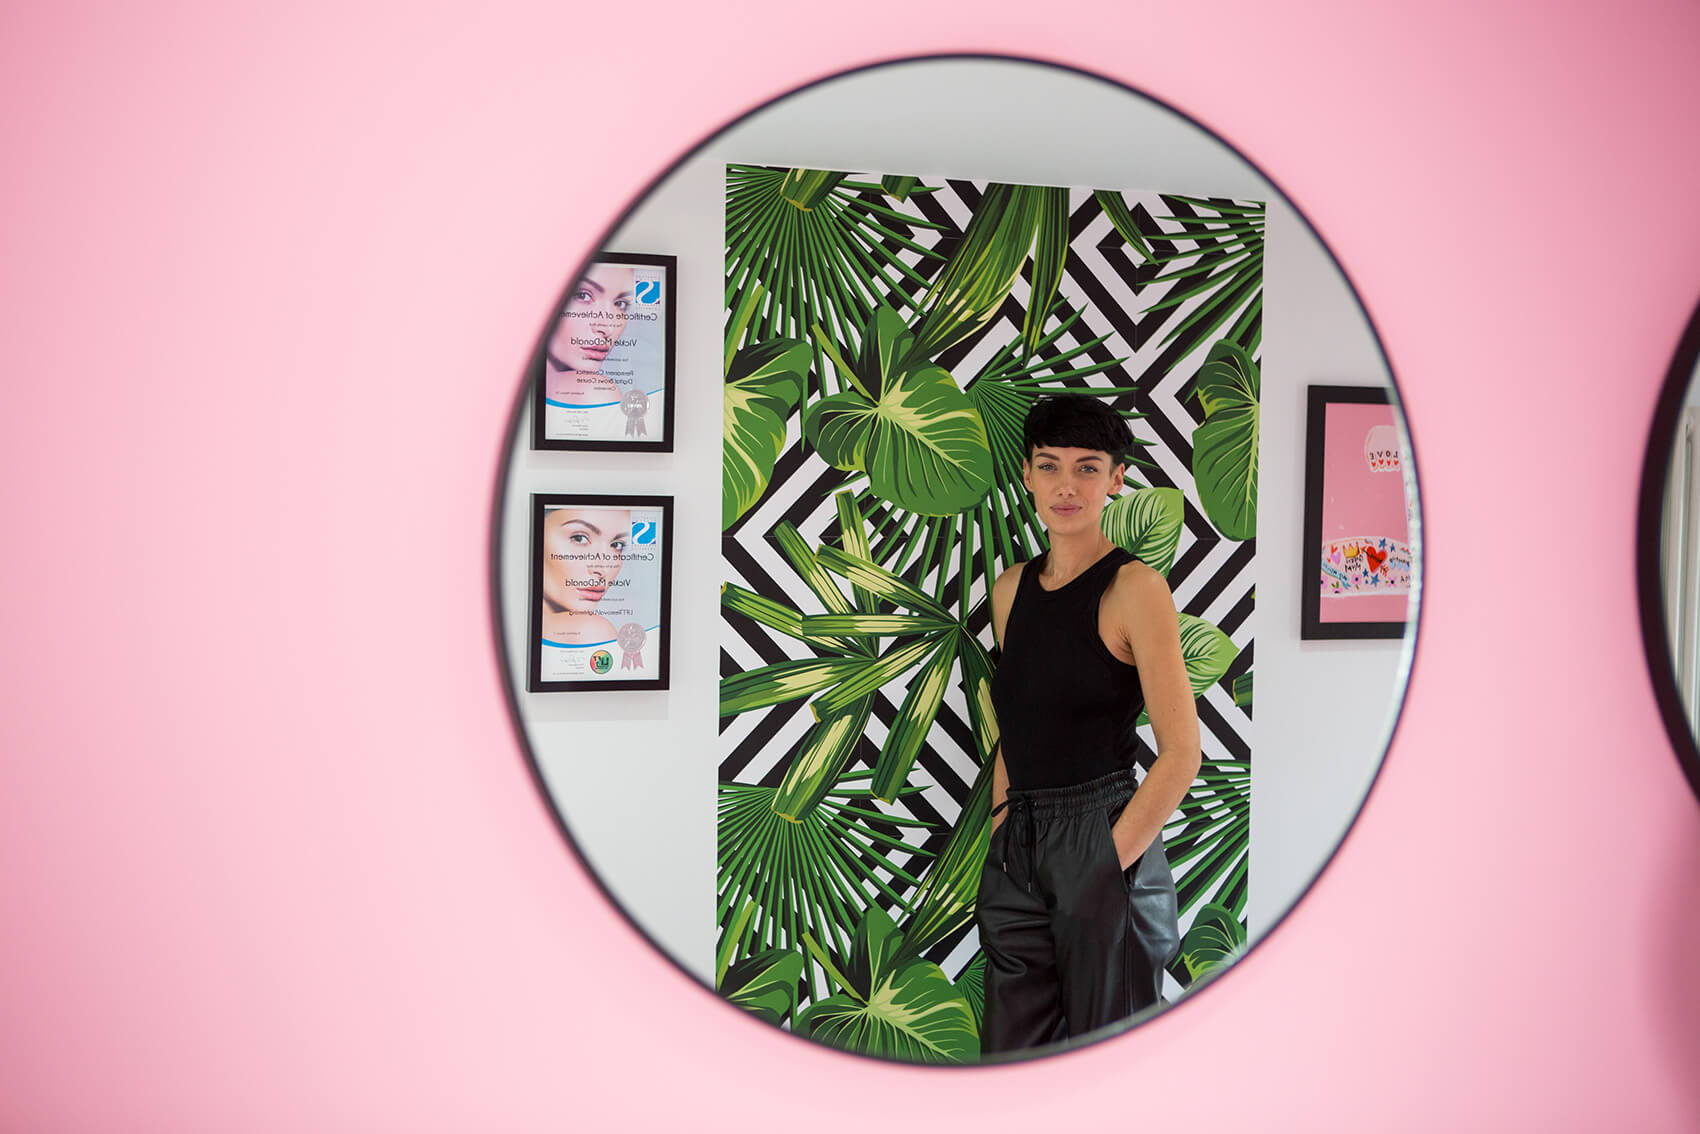 A woman smiling into a mirror on a pink wall